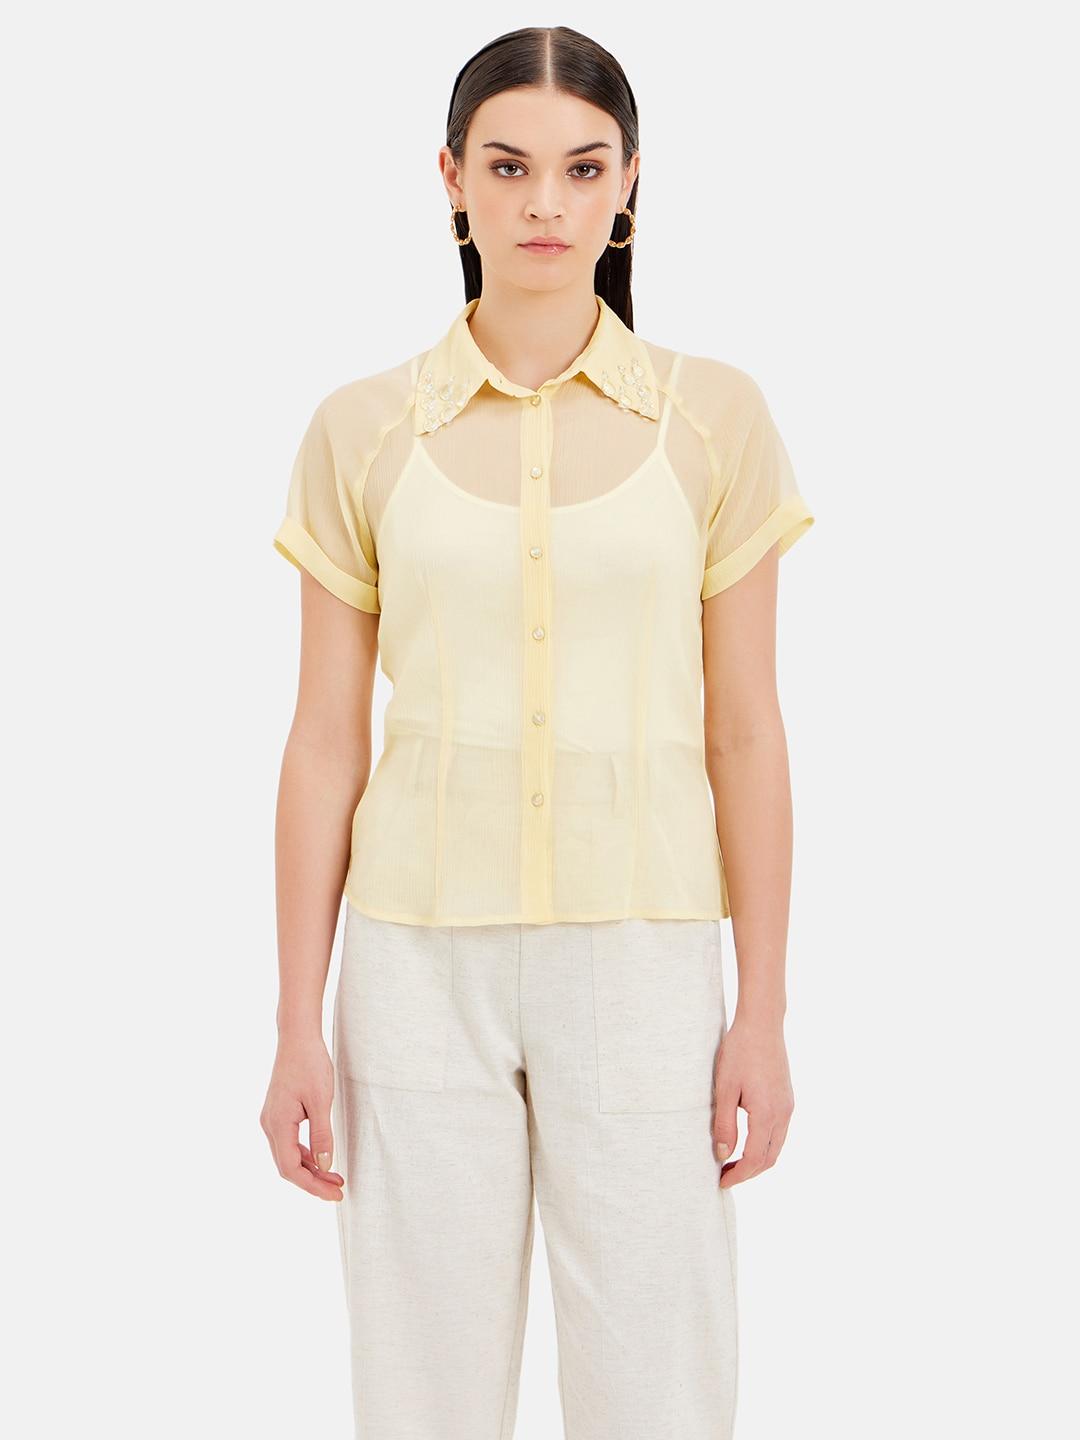 kazo-spread-collar-short-extended-sleeves-sheer-standard-opaque-party-shirt